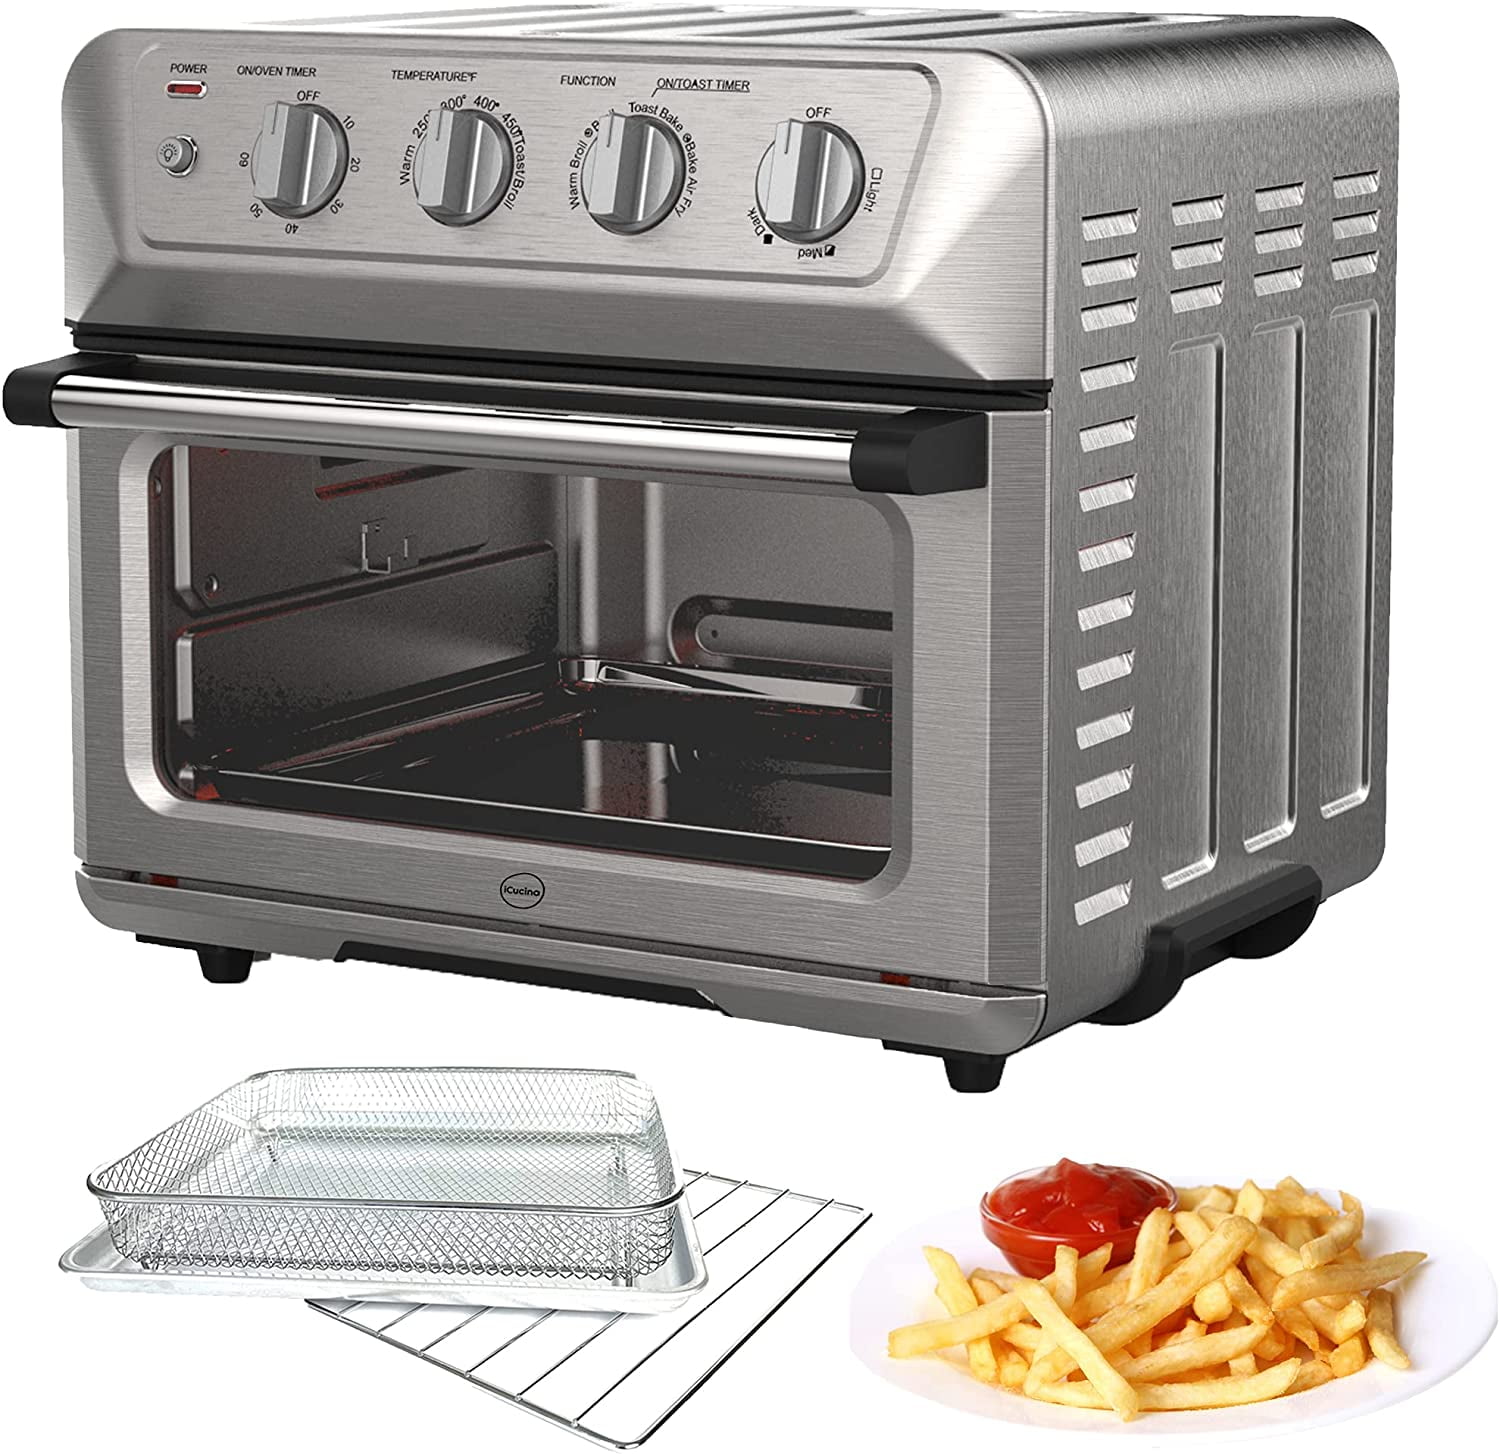 Panasonic 4-in-1 Combination Oven with Air Fry – Features, Cooking Tips,  Care and Cleaning 